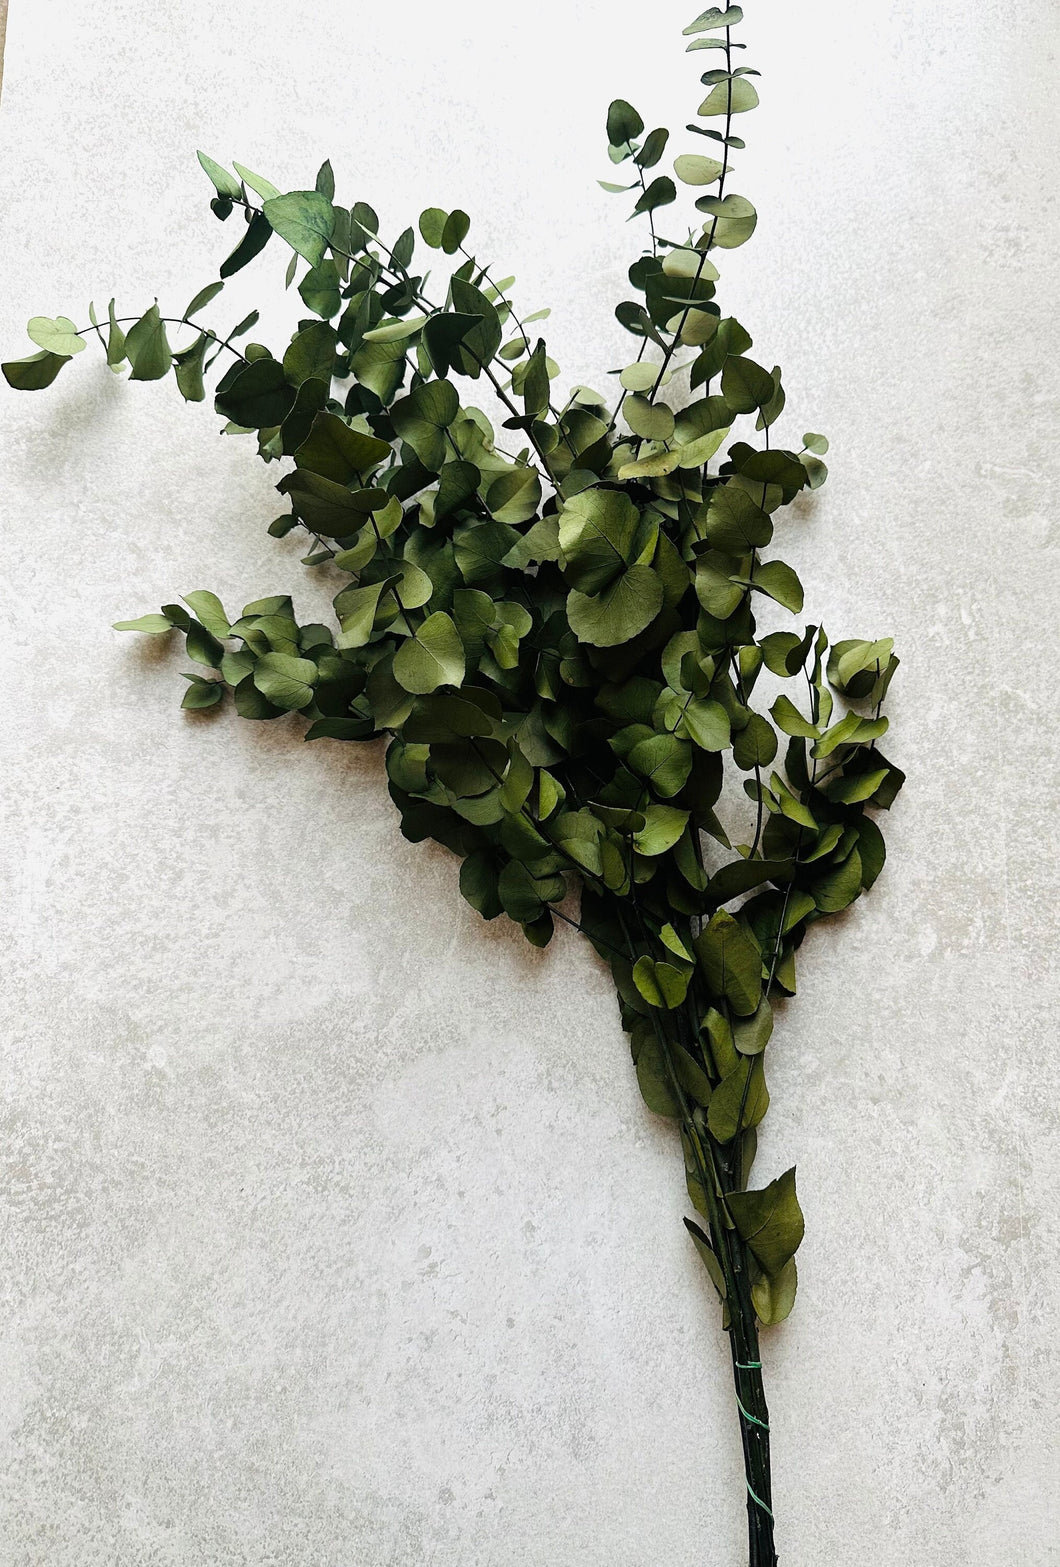 Real Preserved Eucalyptus Cinerea Bunch Everlasting Greenery Dried Foliage Leaves Moss Green Colour Length approx 70cm